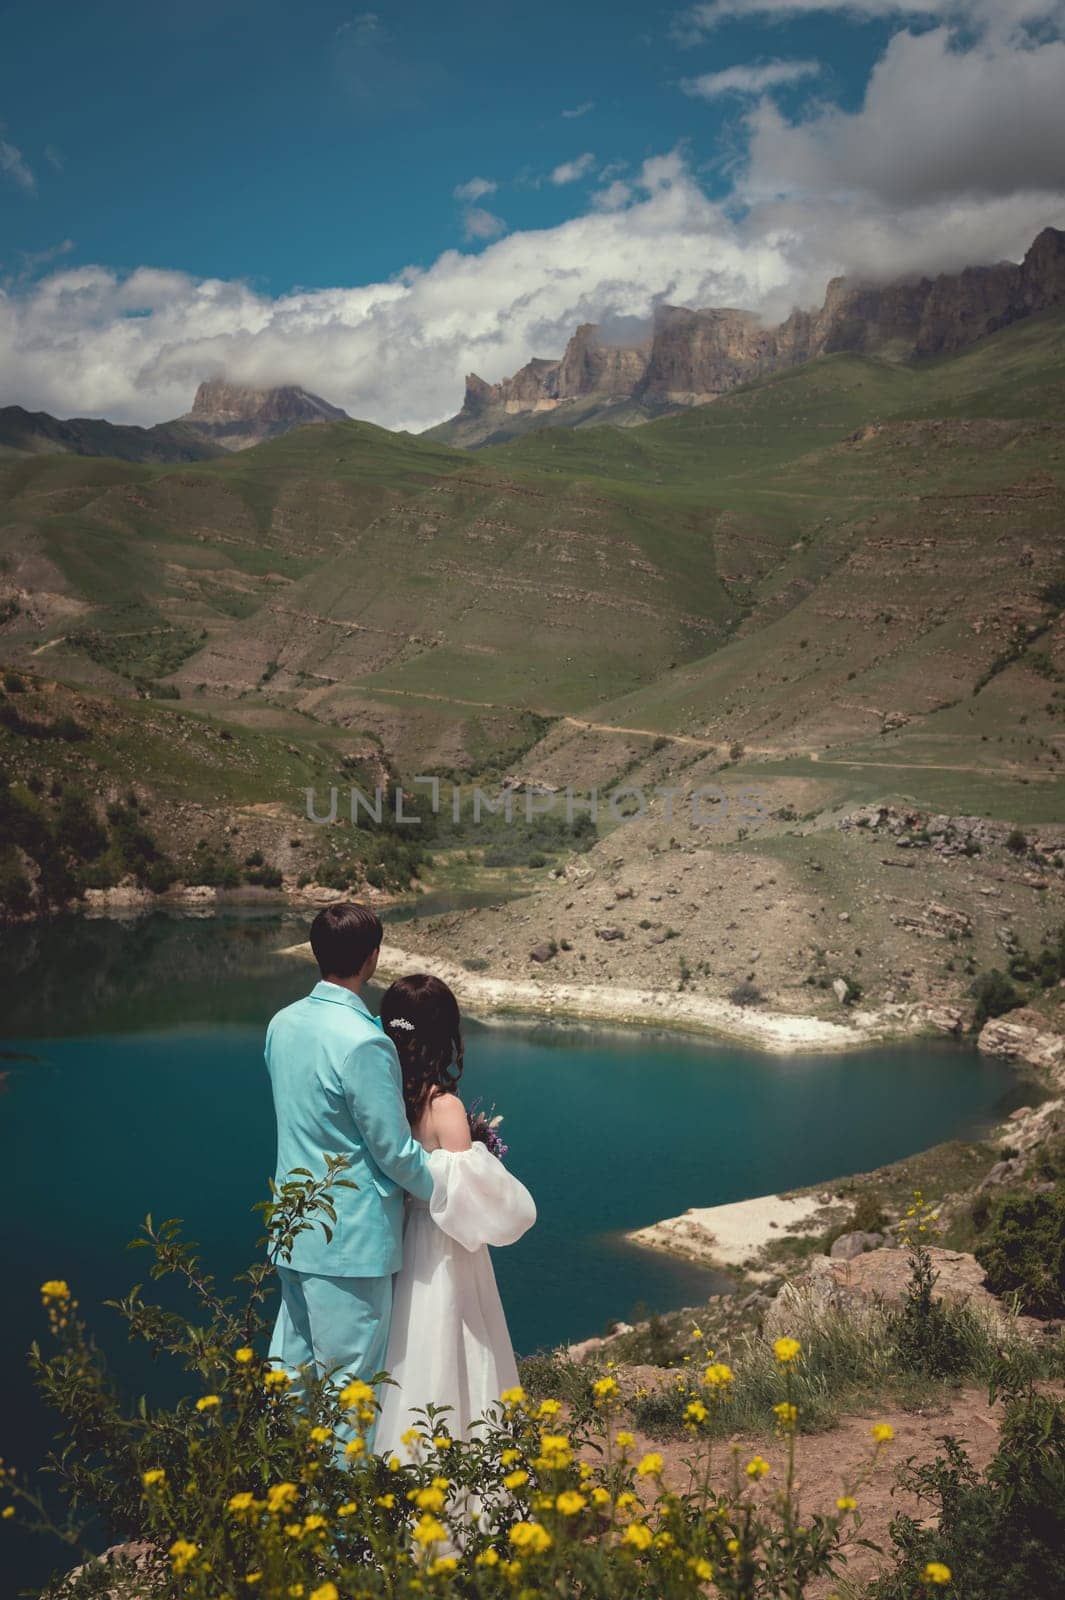 Bride and groom dressed elegant in their wedding gowns holding hands and hugging posing for their photo session. in a desert mountains like landscape by the lake.